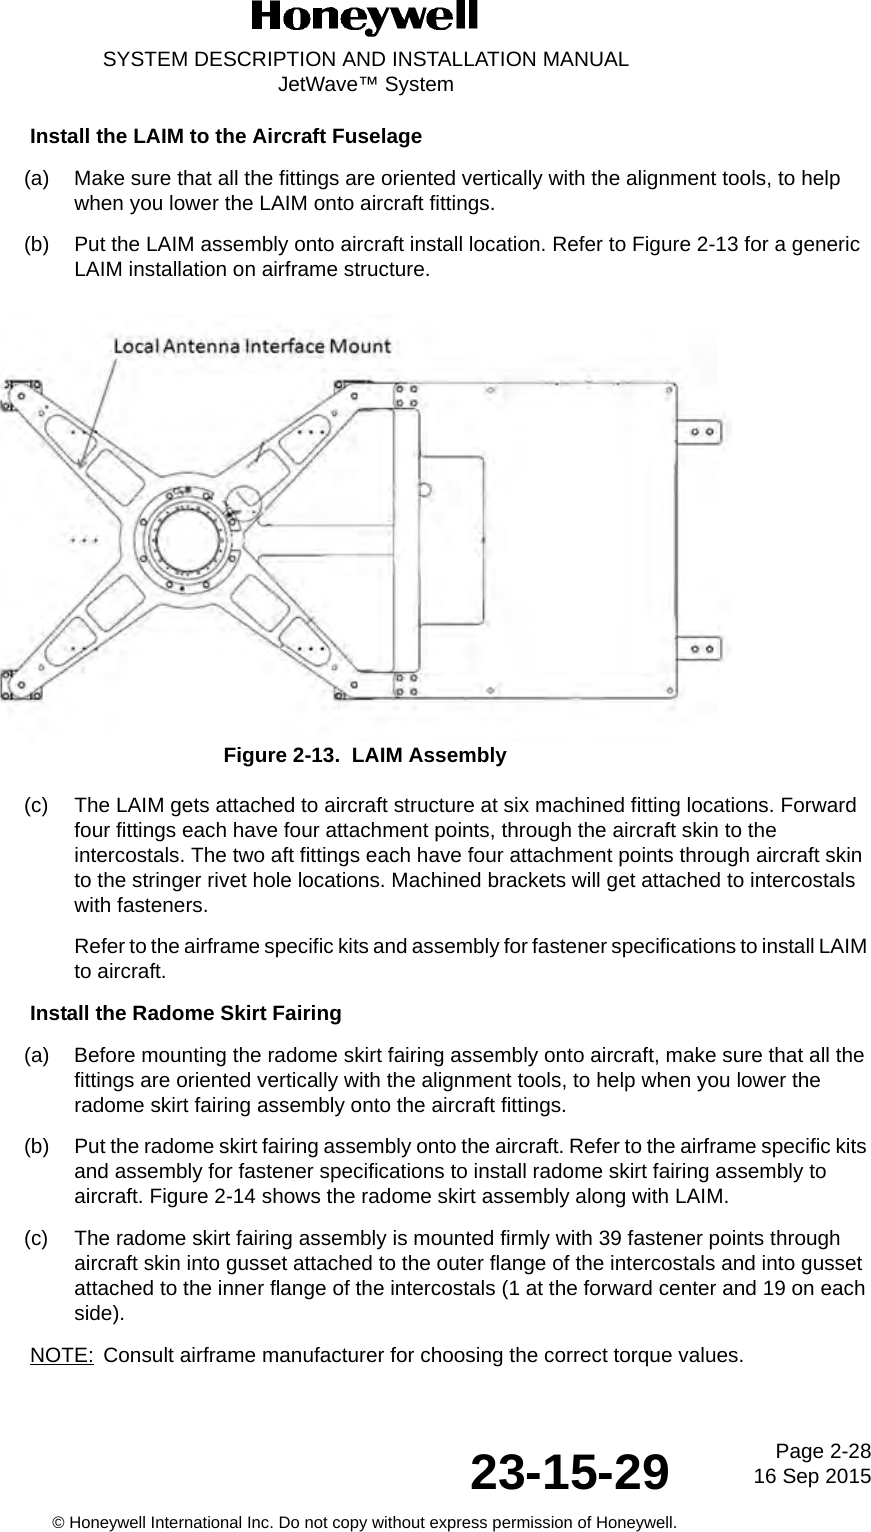 Page 2-28 16 Sep 201523-15-29SYSTEM DESCRIPTION AND INSTALLATION MANUALJetWave™ System© Honeywell International Inc. Do not copy without express permission of Honeywell.Install the LAIM to the Aircraft Fuselage (a) Make sure that all the fittings are oriented vertically with the alignment tools, to help when you lower the LAIM onto aircraft fittings. (b) Put the LAIM assembly onto aircraft install location. Refer to Figure 2-13 for a generic LAIM installation on airframe structure.Figure 2-13.  LAIM Assembly (c) The LAIM gets attached to aircraft structure at six machined fitting locations. Forward four fittings each have four attachment points, through the aircraft skin to the intercostals. The two aft fittings each have four attachment points through aircraft skin to the stringer rivet hole locations. Machined brackets will get attached to intercostals with fasteners. Refer to the airframe specific kits and assembly for fastener specifications to install LAIM to aircraft. Install the Radome Skirt Fairing(a) Before mounting the radome skirt fairing assembly onto aircraft, make sure that all the fittings are oriented vertically with the alignment tools, to help when you lower the radome skirt fairing assembly onto the aircraft fittings. (b) Put the radome skirt fairing assembly onto the aircraft. Refer to the airframe specific kits and assembly for fastener specifications to install radome skirt fairing assembly to aircraft. Figure 2-14 shows the radome skirt assembly along with LAIM. (c) The radome skirt fairing assembly is mounted firmly with 39 fastener points through aircraft skin into gusset attached to the outer flange of the intercostals and into gusset attached to the inner flange of the intercostals (1 at the forward center and 19 on each side). NOTE: Consult airframe manufacturer for choosing the correct torque values. 